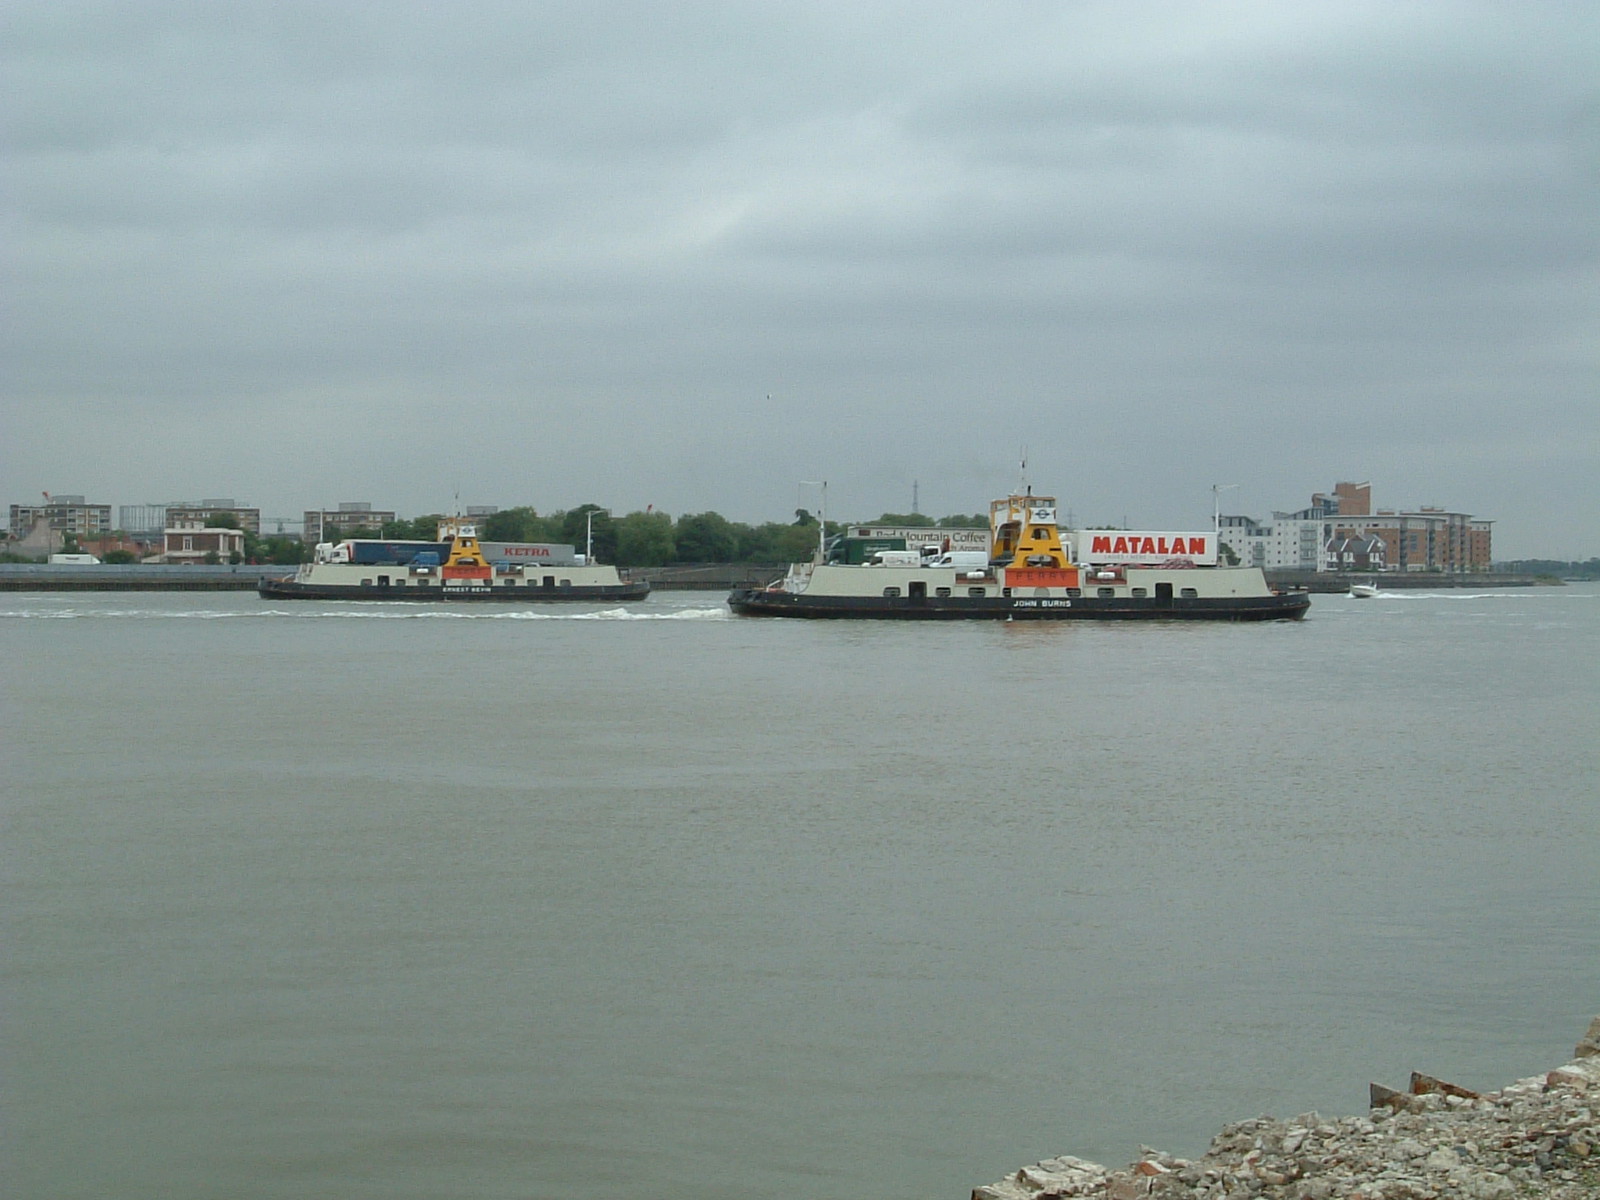 Ferries passing each other as they cross the Thames at Woolwich